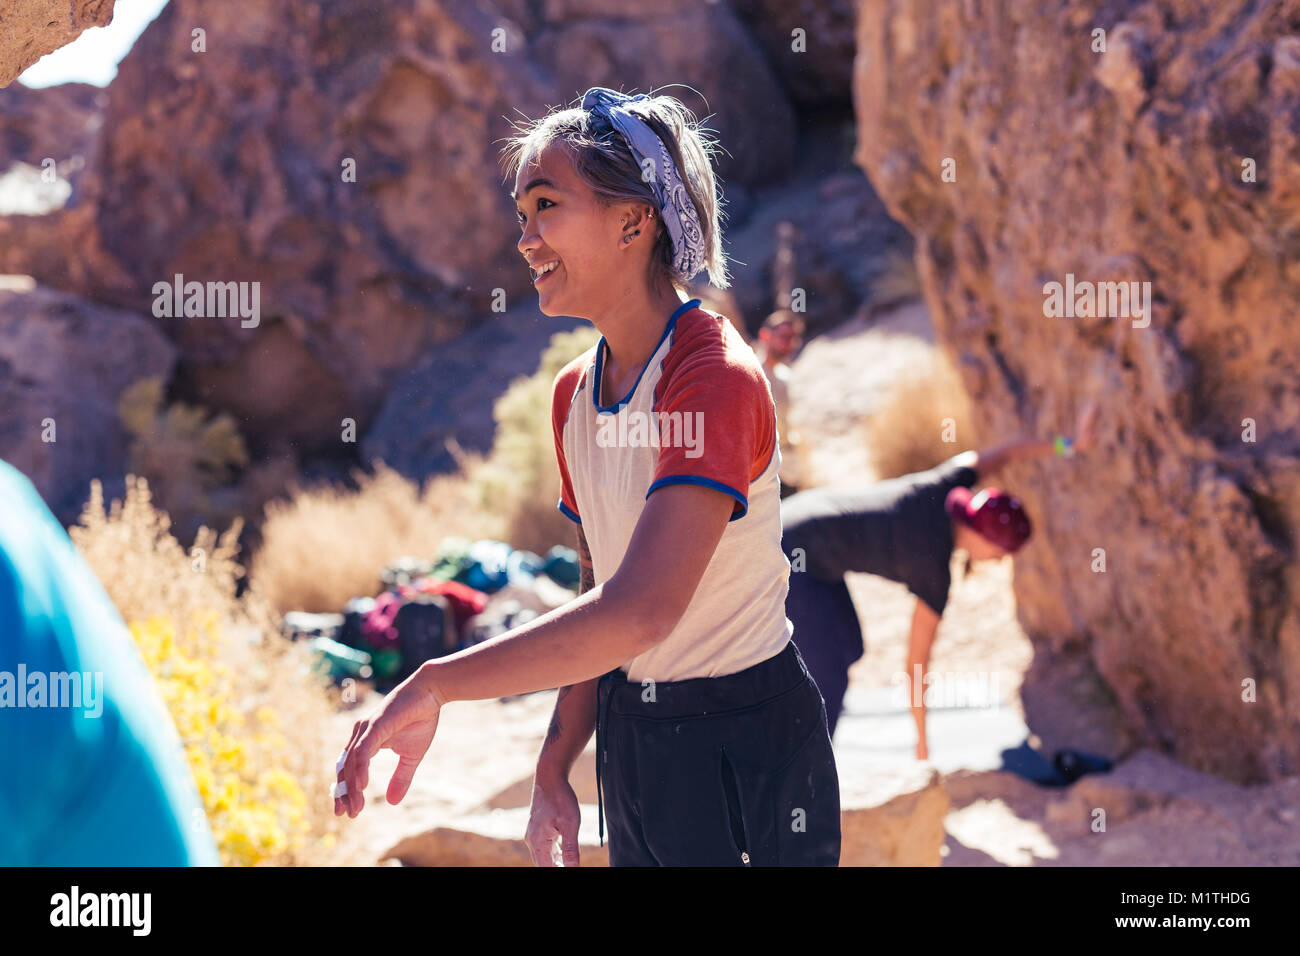 Petite asian woman rock climbing outdoors laughs while spectating Stock Photo